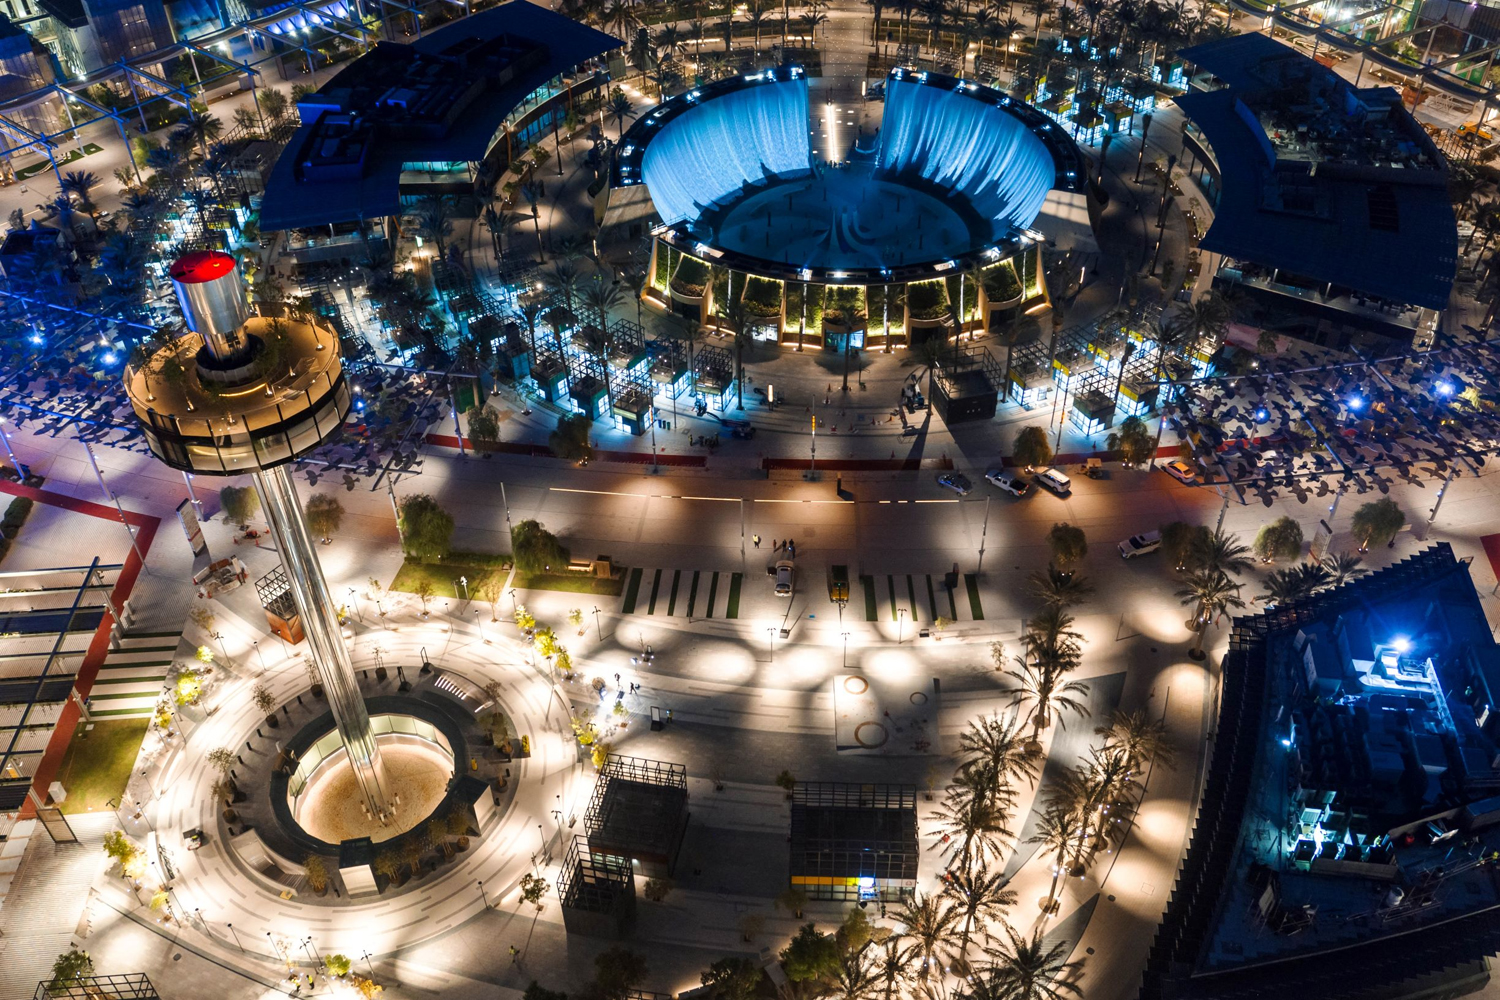 Expo 2020 Dubai has unveiled two stunning attractions